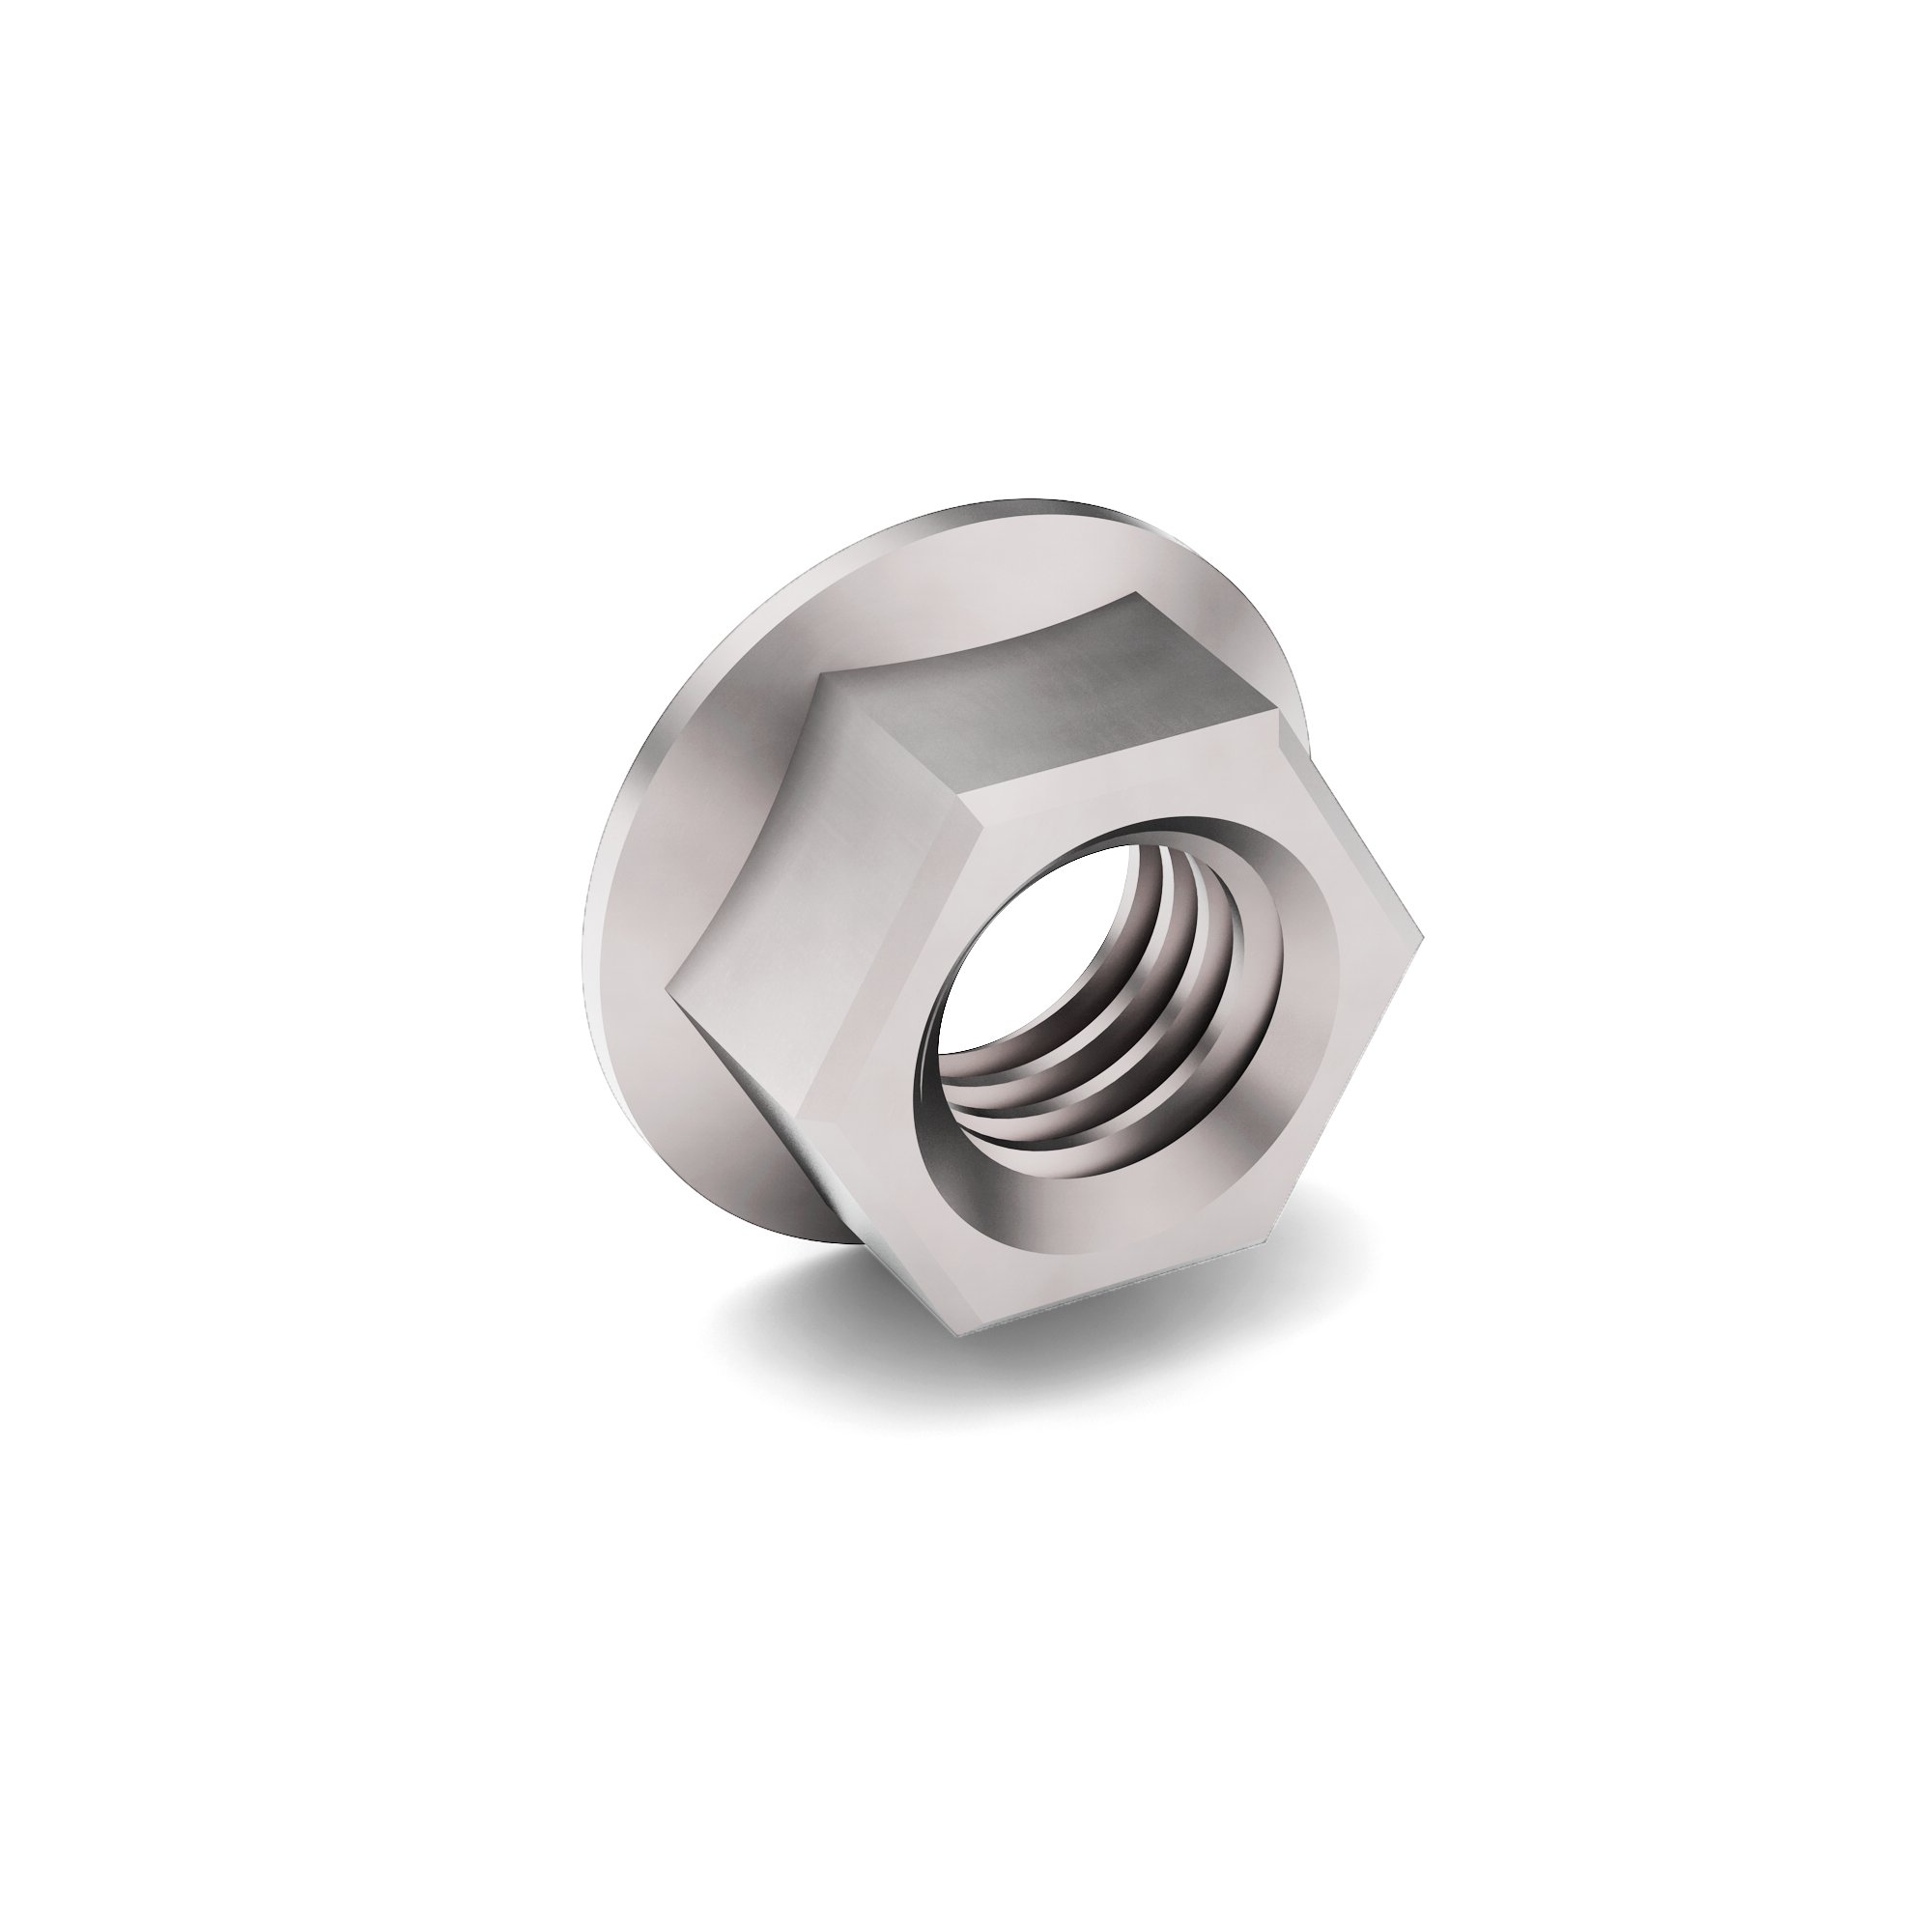 M5-0.8 ISO 10 Hex Flange Nut DIN 6923 Zinc Clear Trivalent